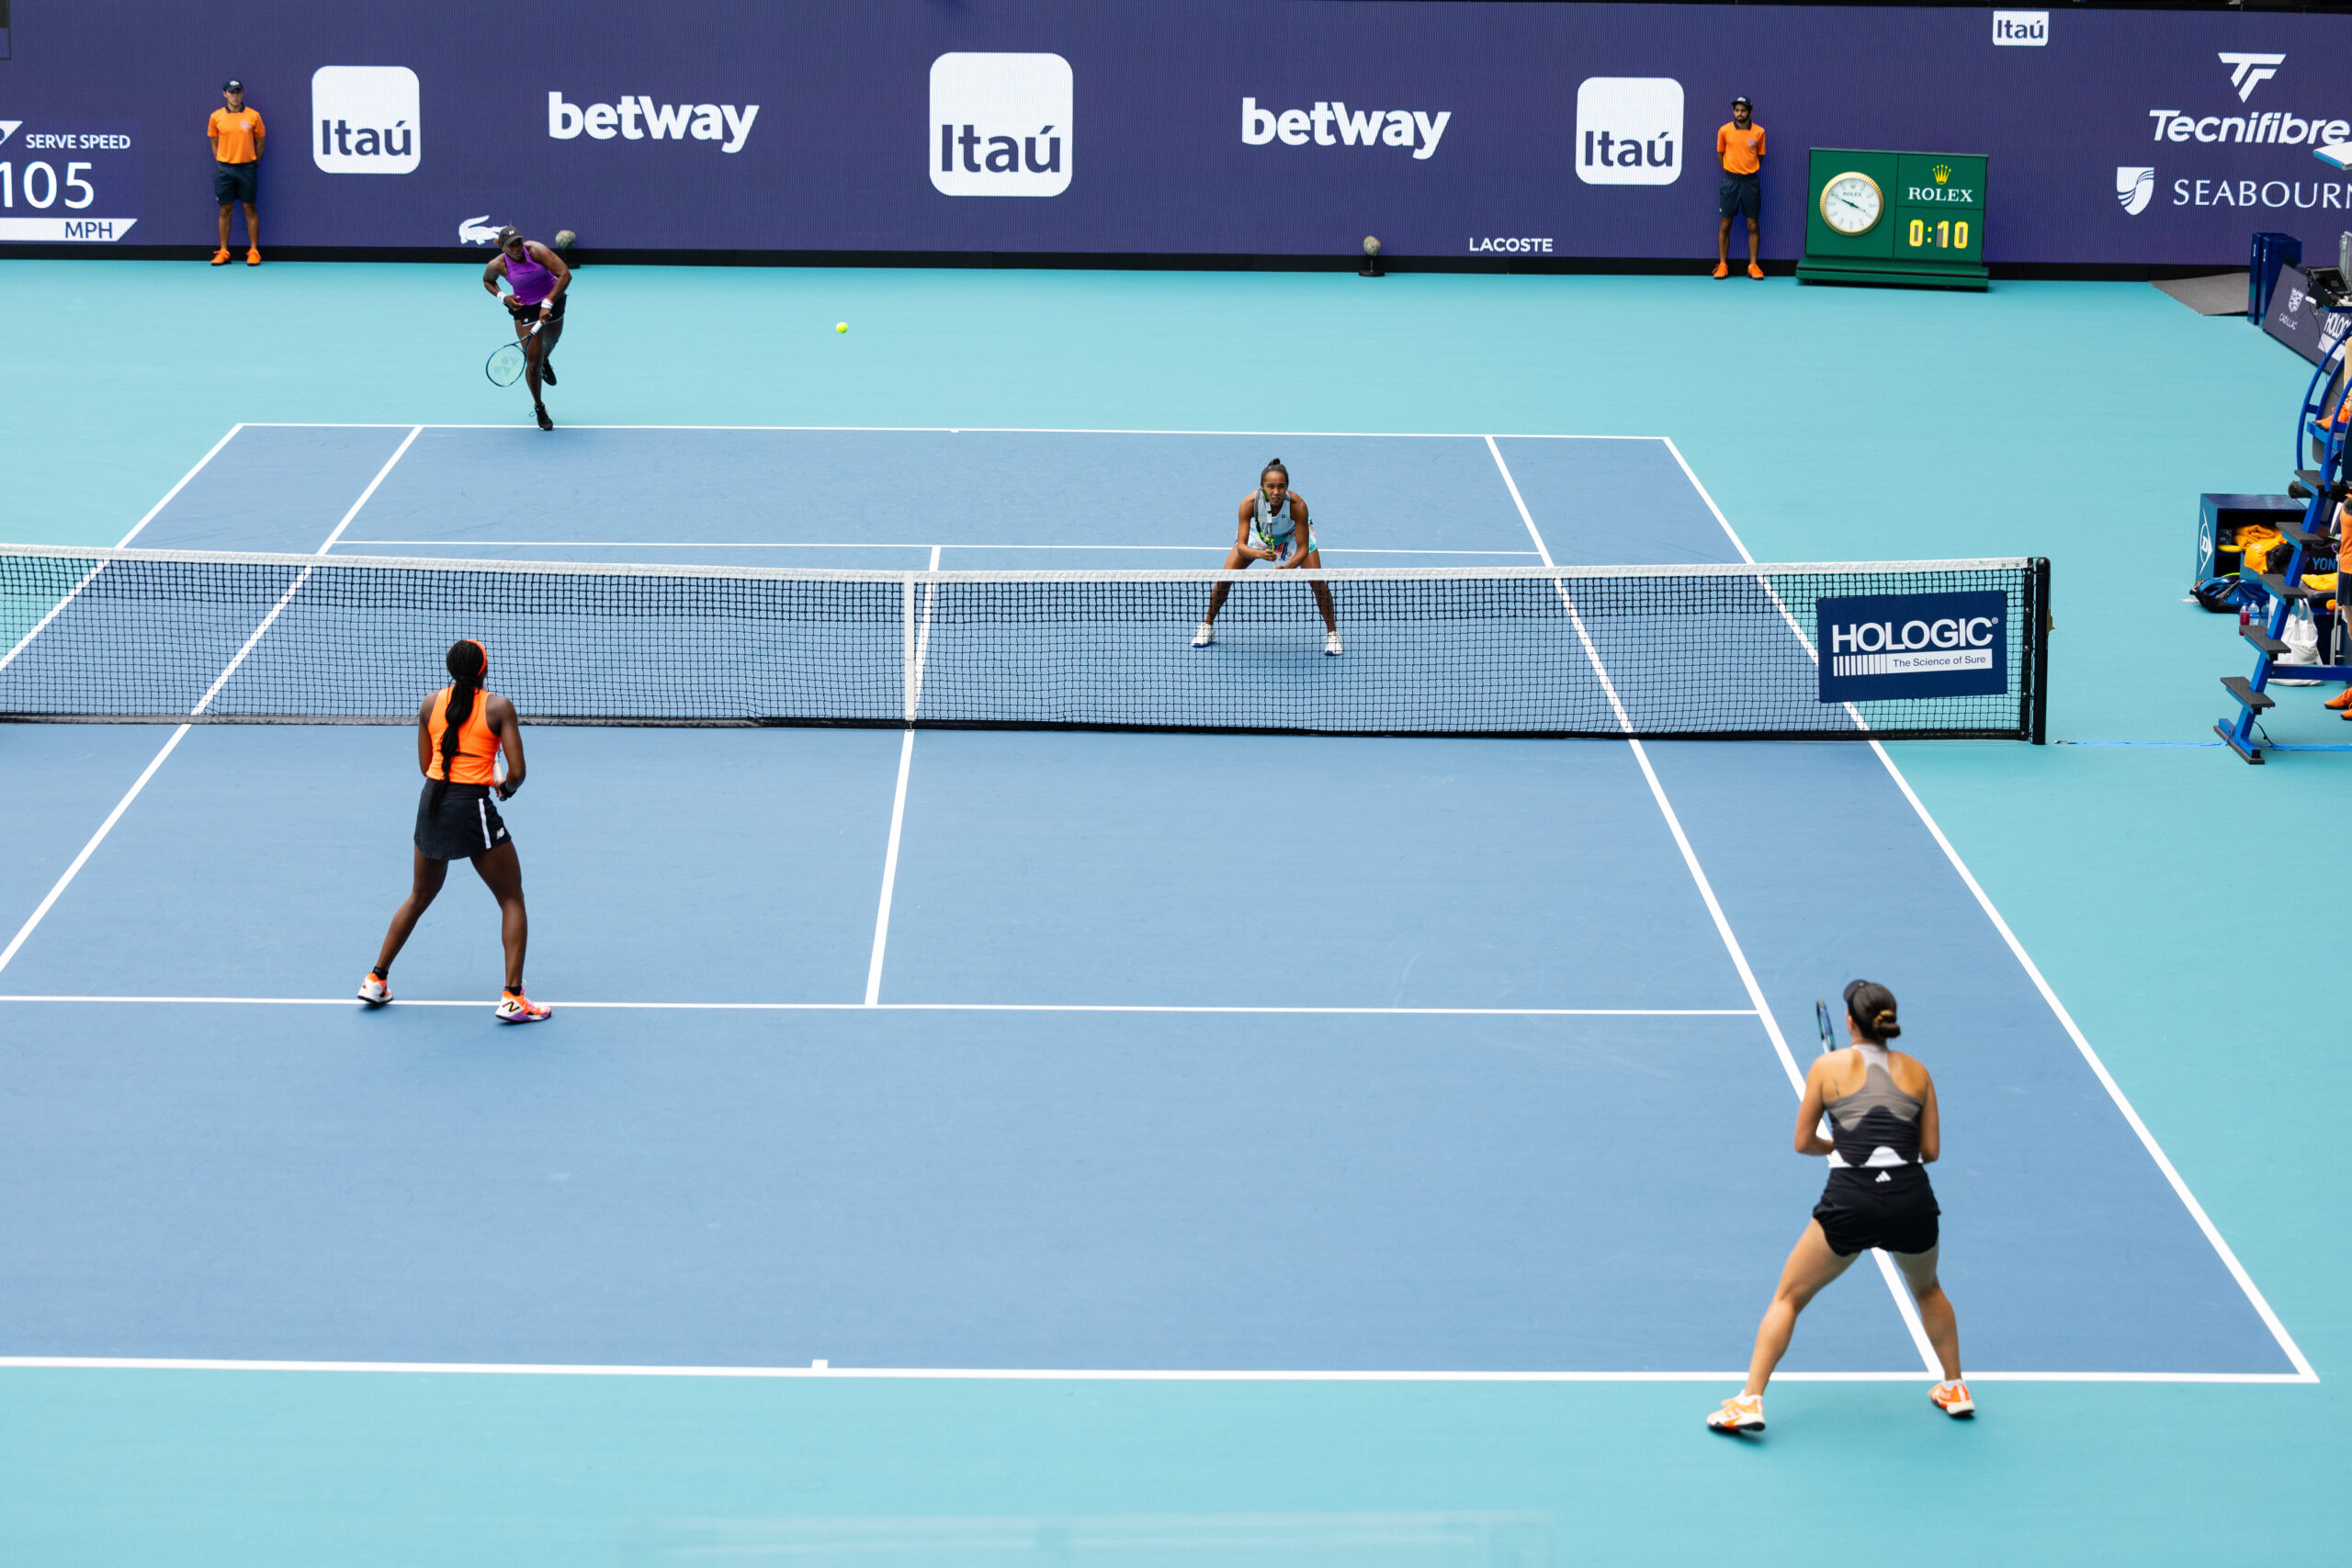 On-court shot of play during the 2023 Women's Doubles Final at the Miami Open at Hard Rock Stadium.